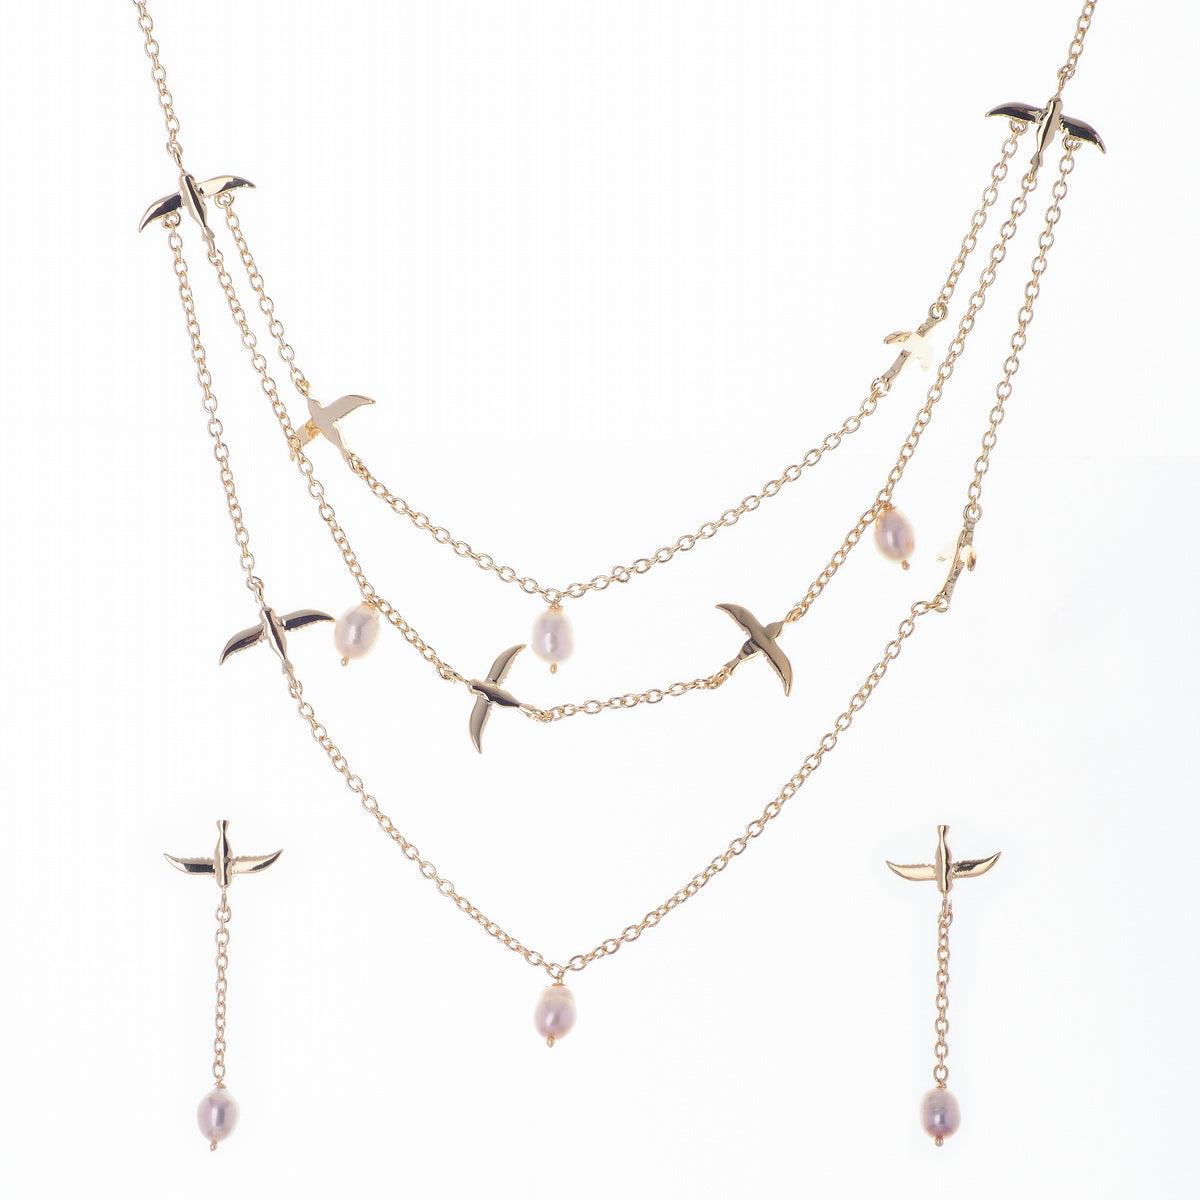 Fasionable Real Pearl Necklace Set - Chandrani Pearls